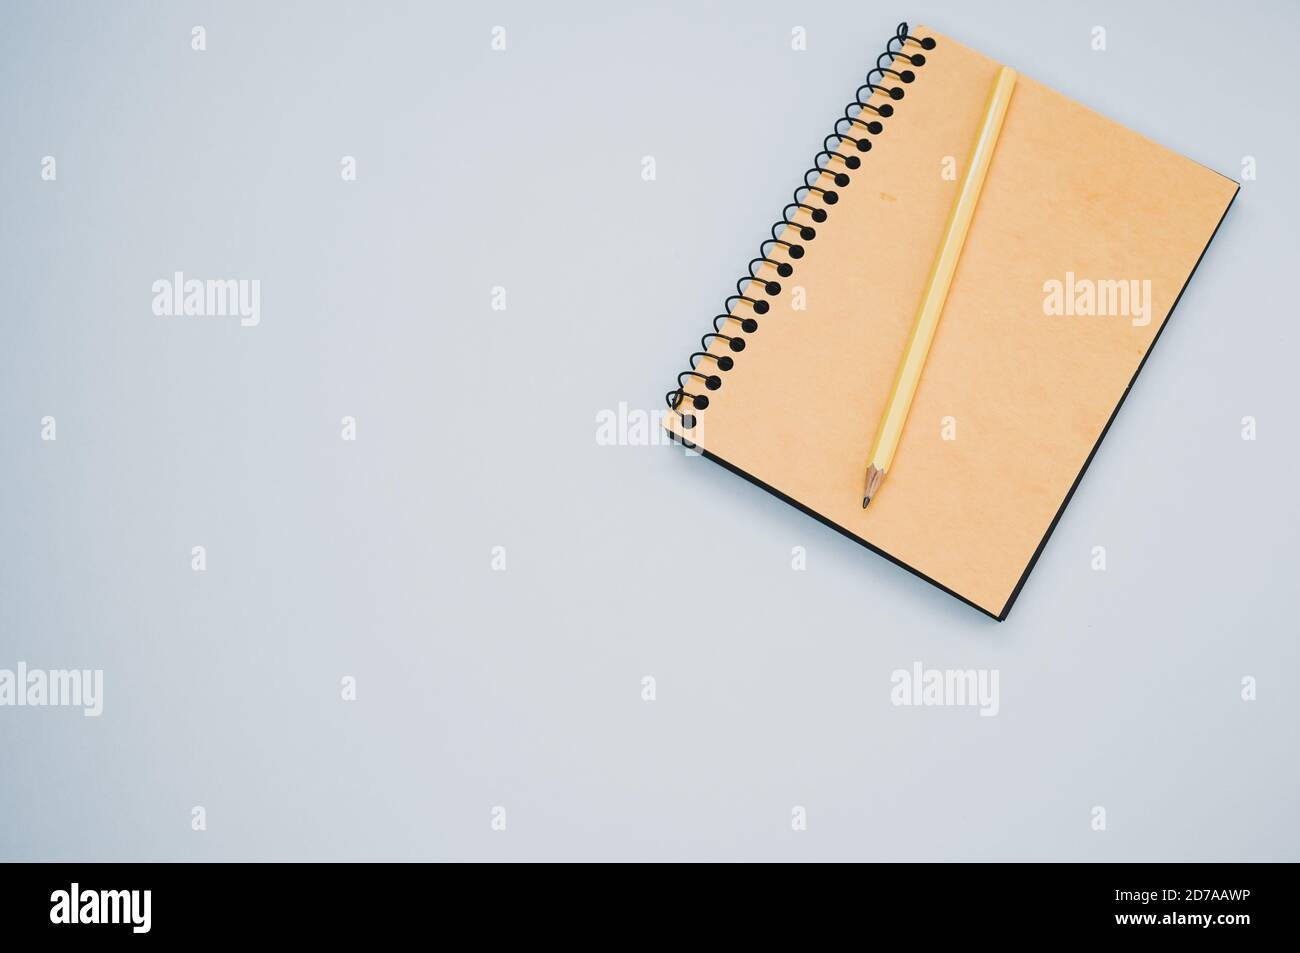 High angle shot of a notebook and a pencil on a blue surface Stock Photo